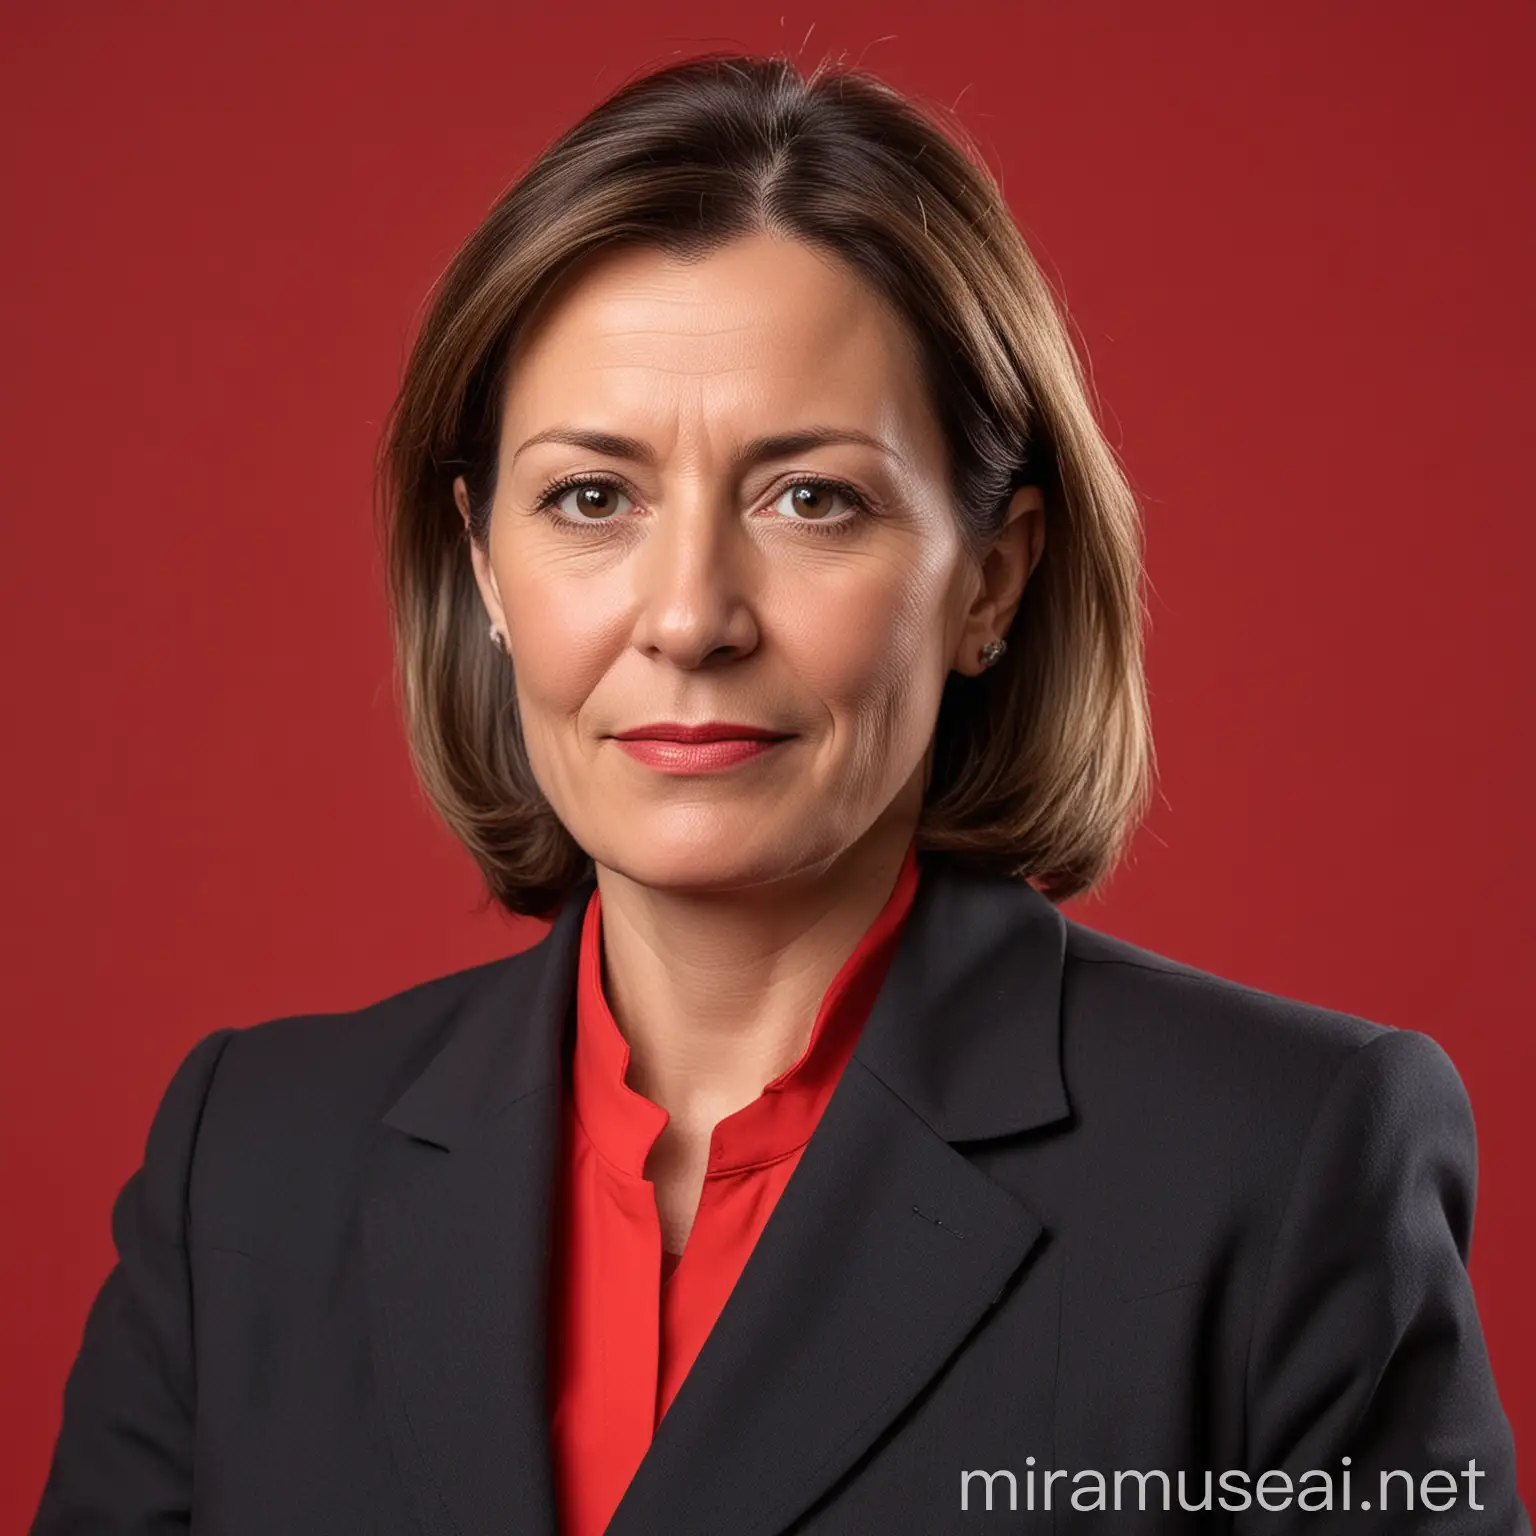 Middleaged Female Politician on Red Background